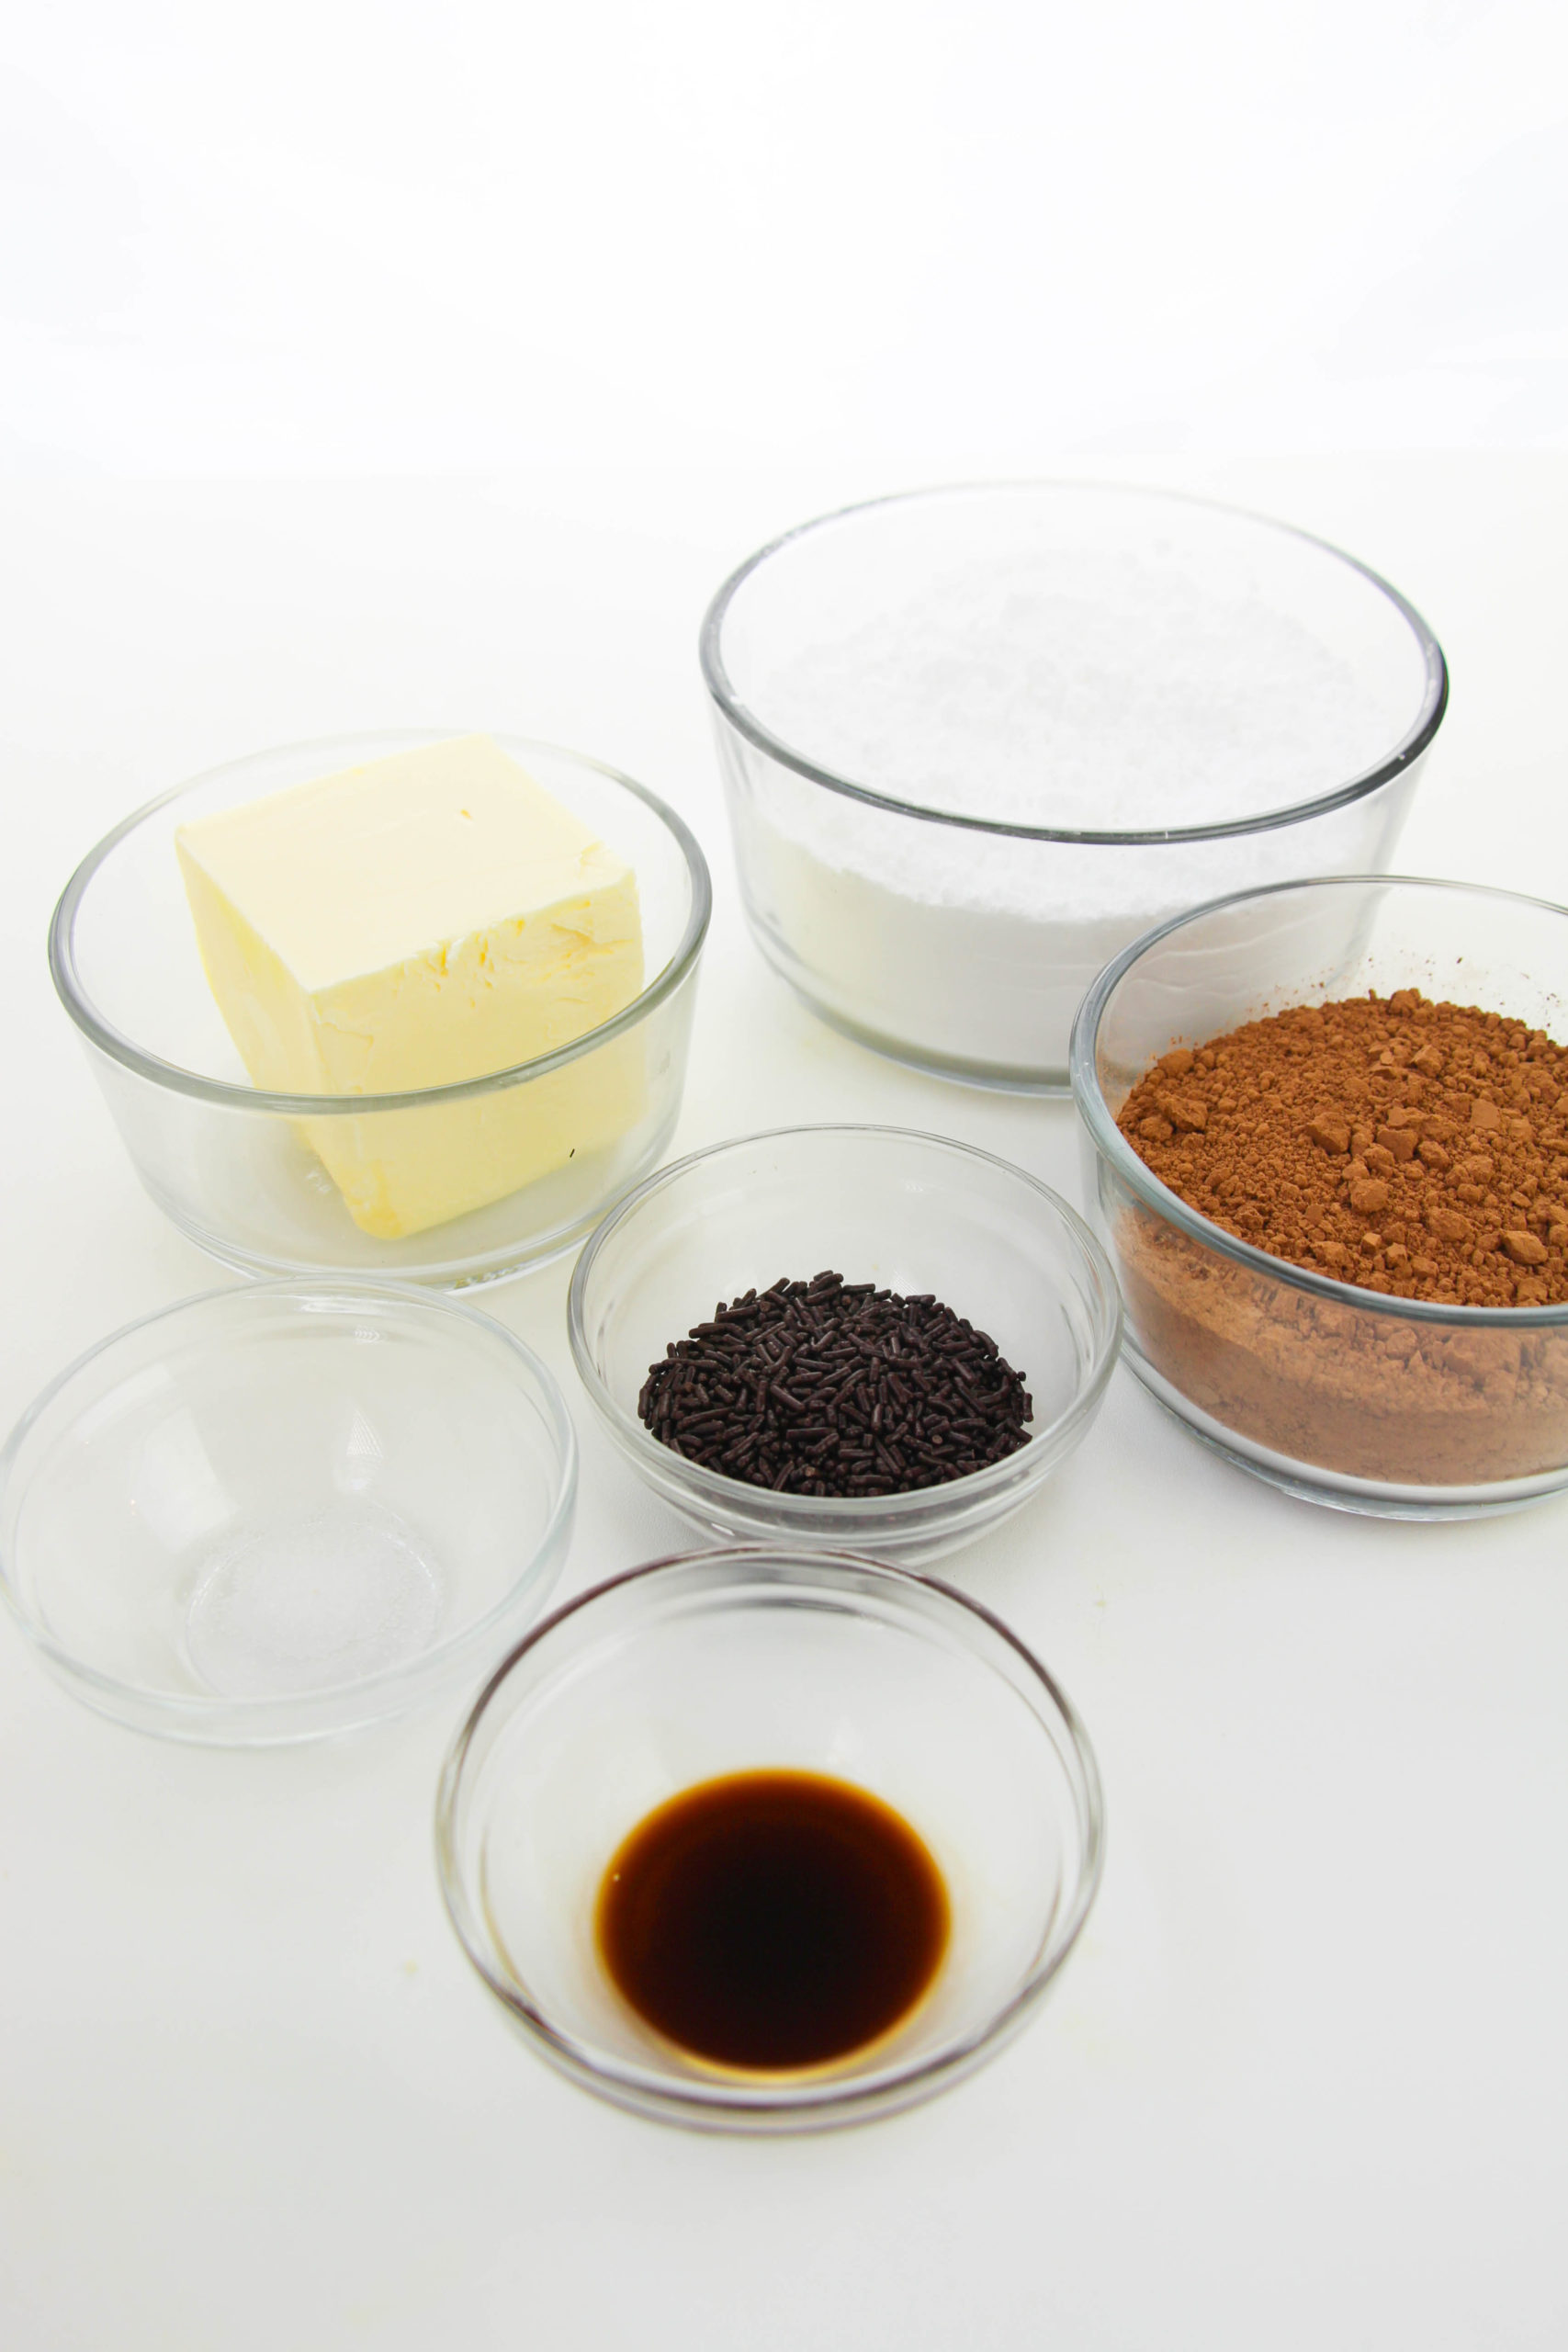 Powered sugar, butter, chocolate and vanilla in clear dishes,